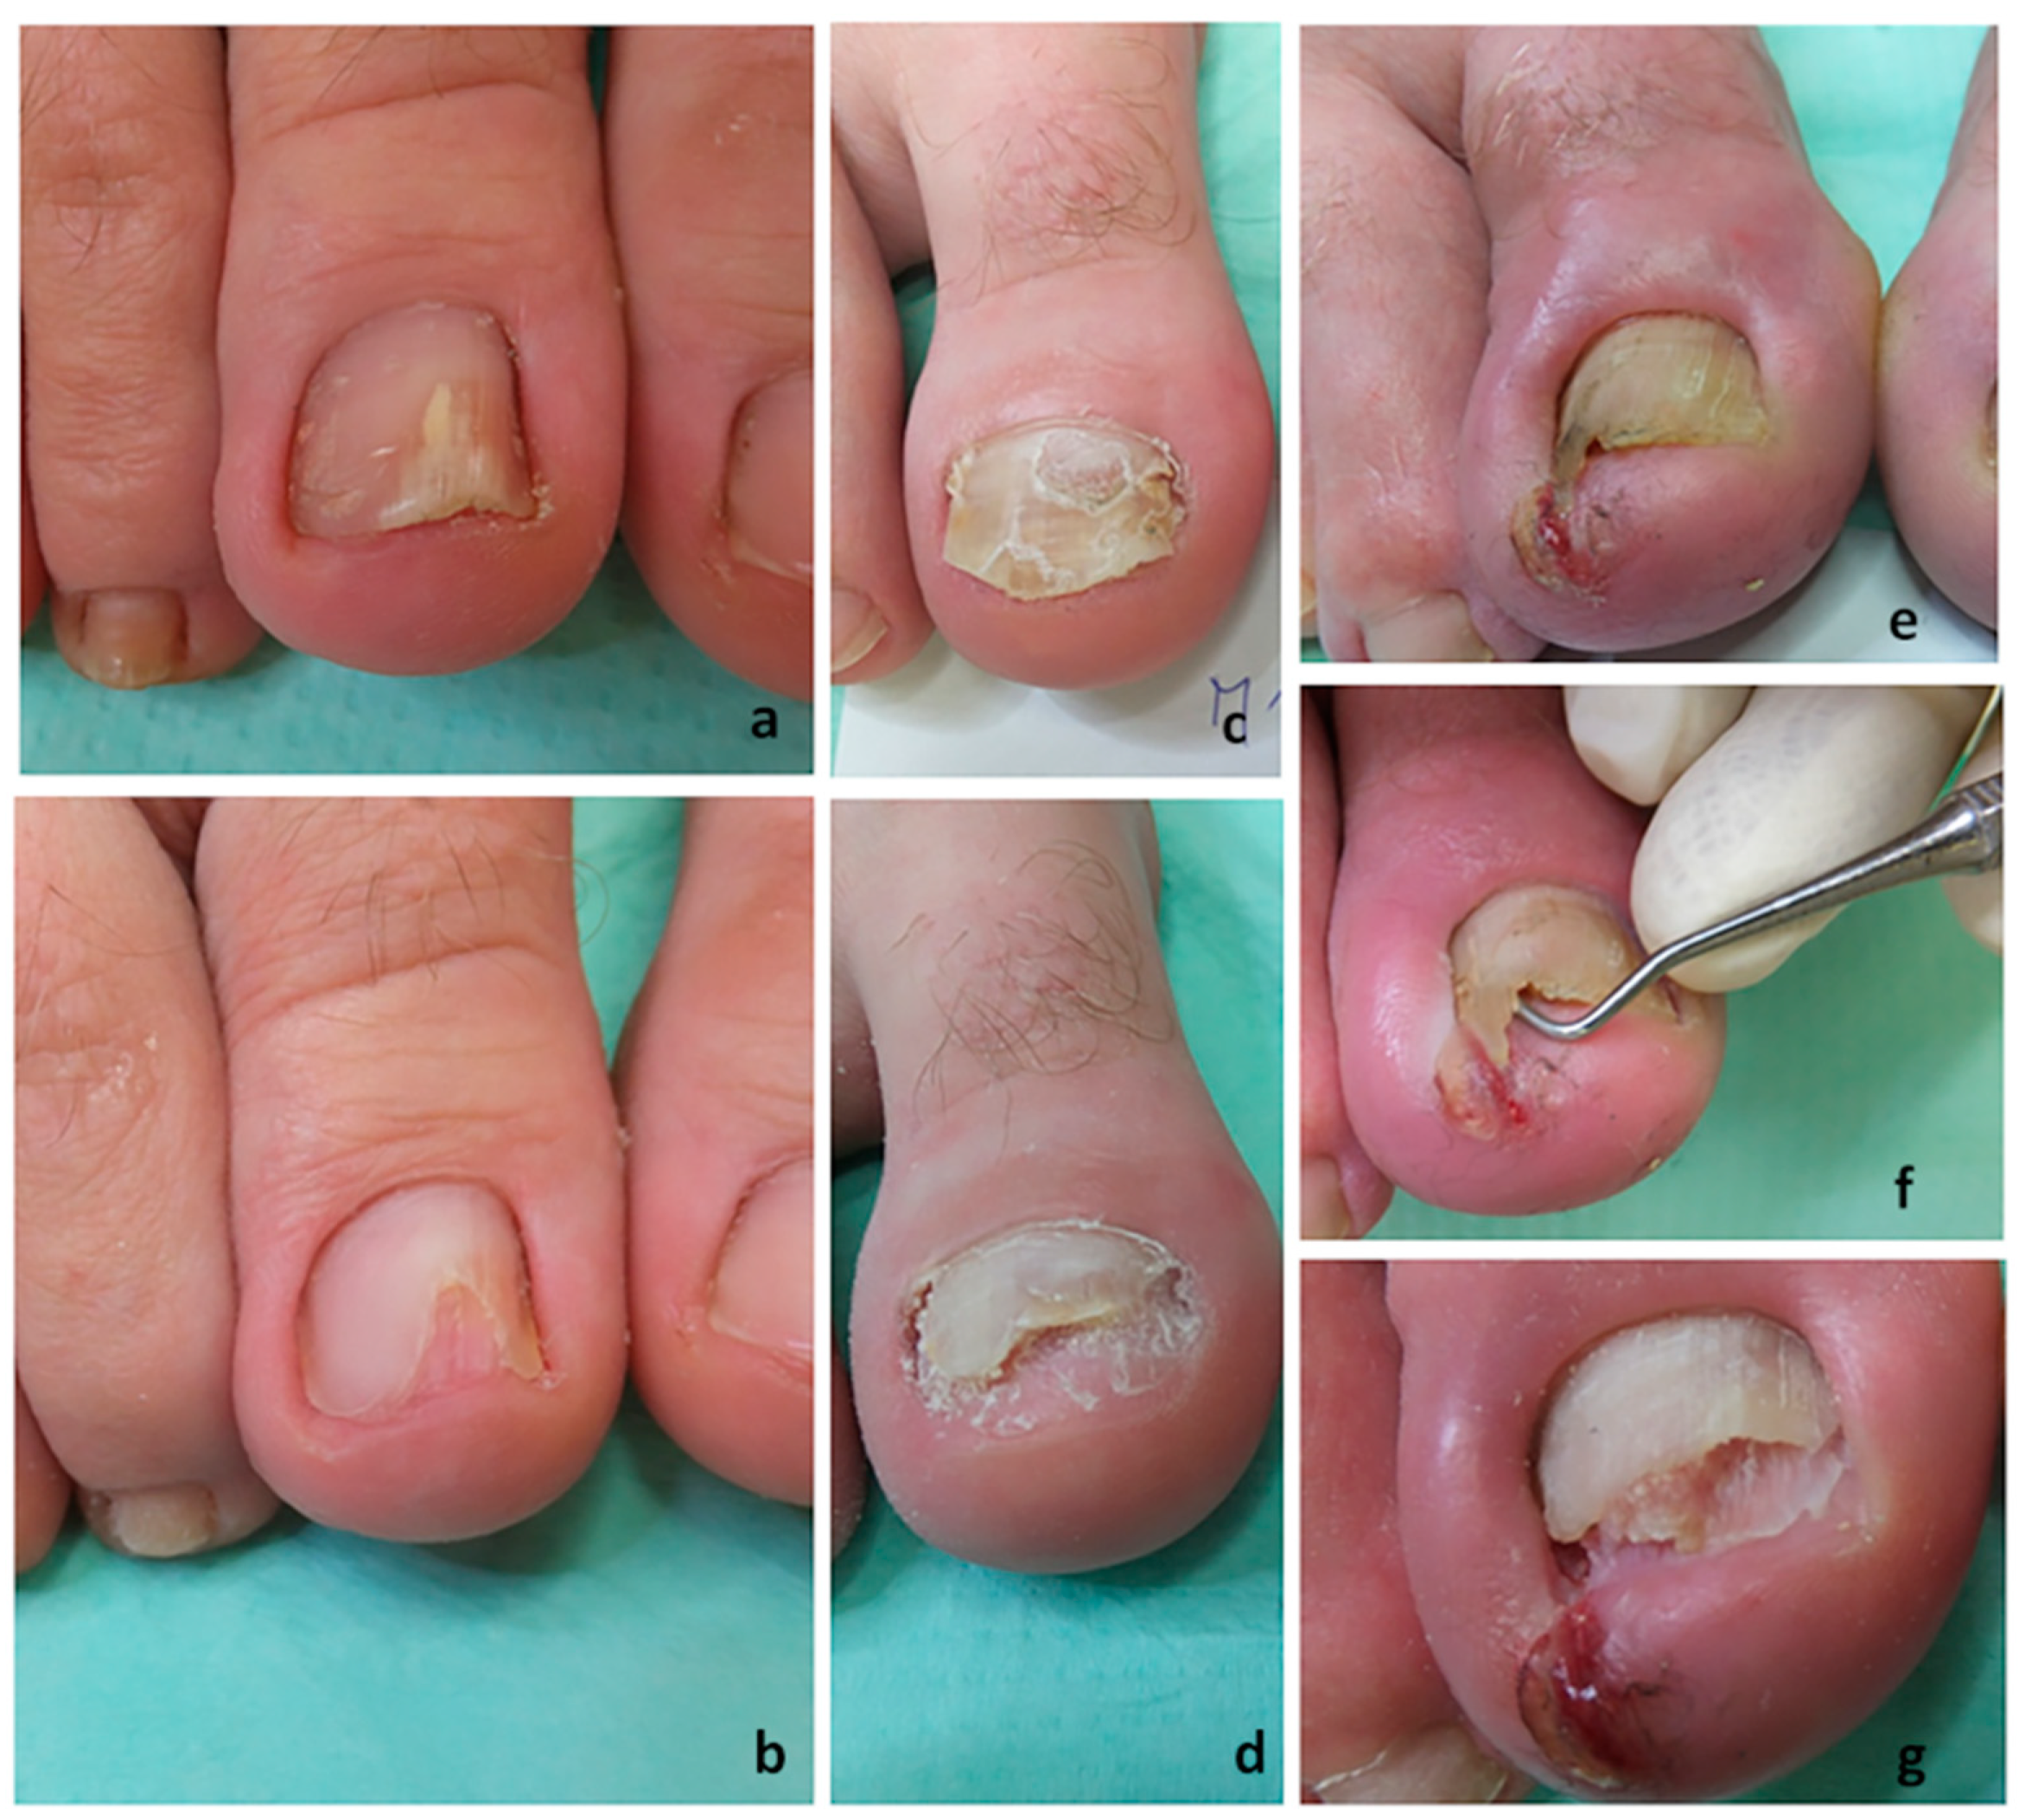 Effective Fungal Nail Treatment for a 16 year old patient